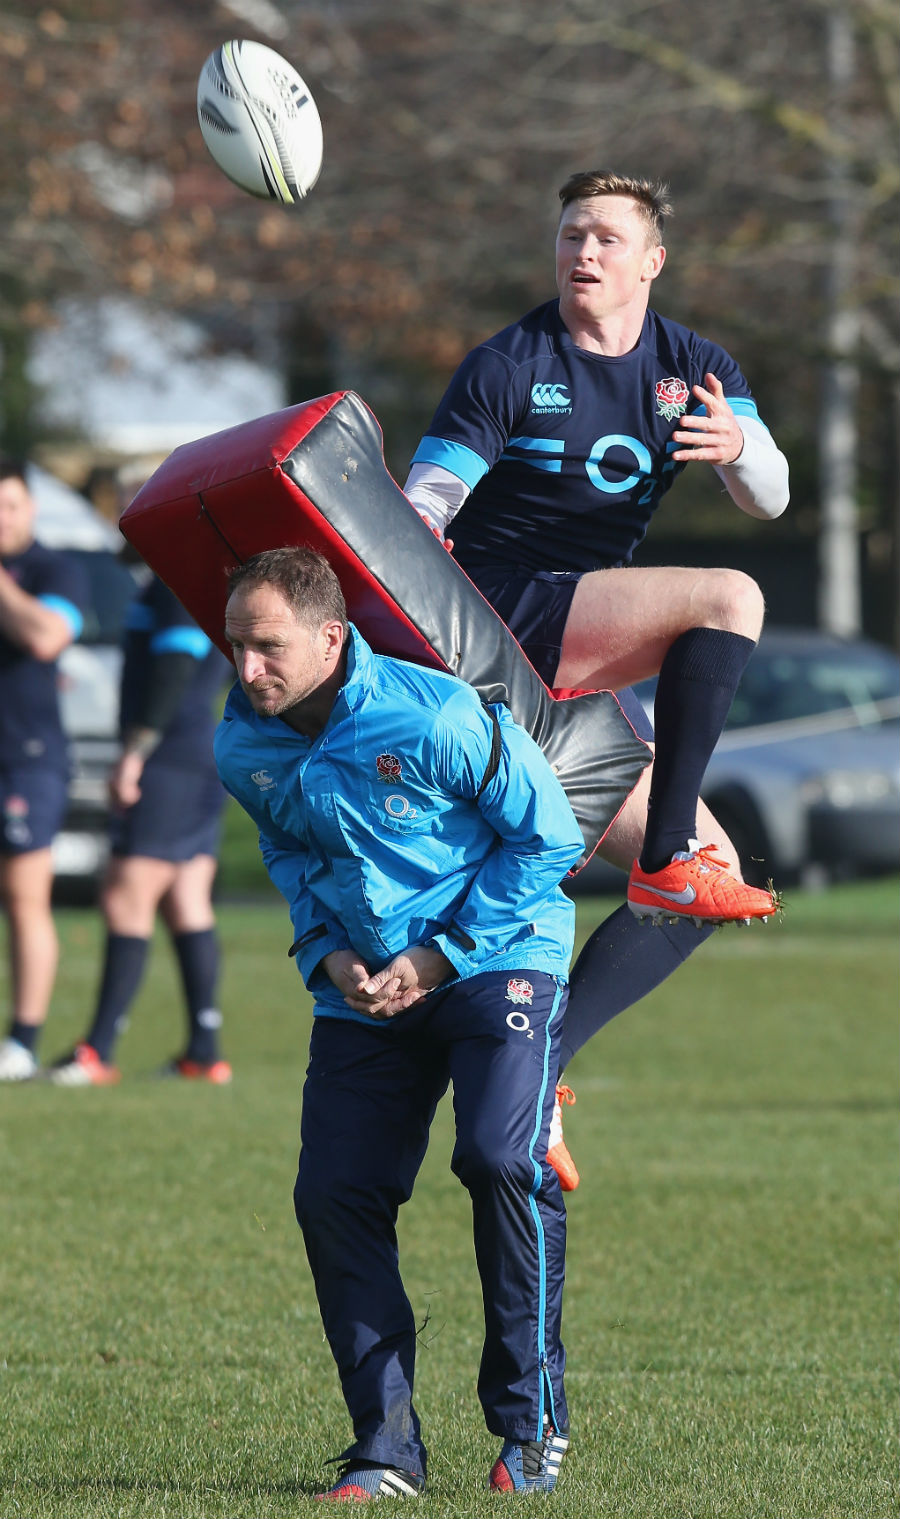 Chris Ashton catches the ball as skills coach Mike Catt holds the tackle bag